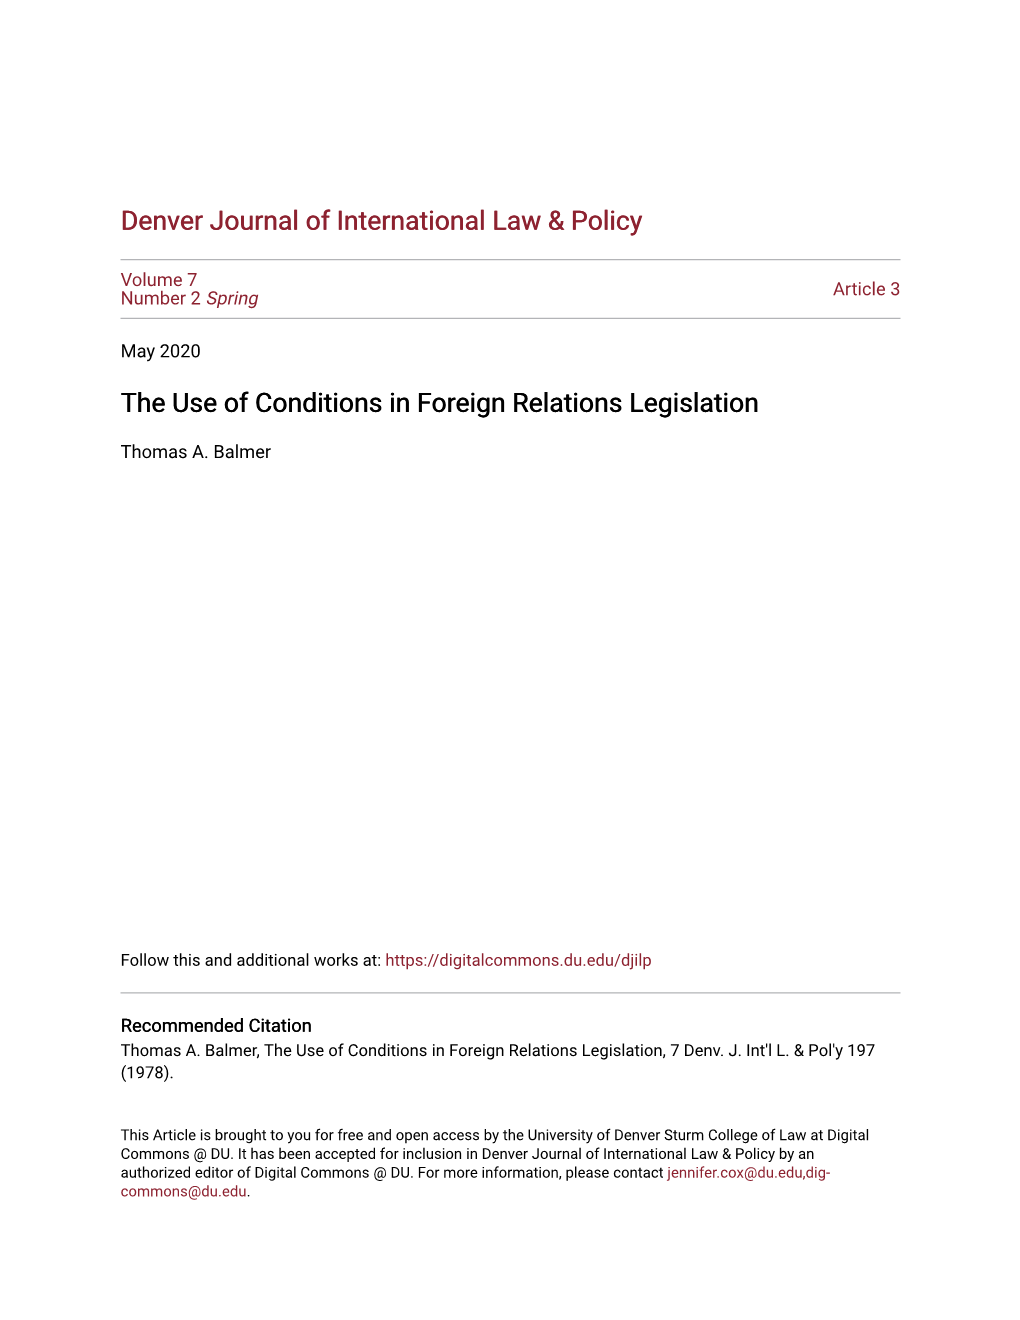 The Use of Conditions in Foreign Relations Legislation